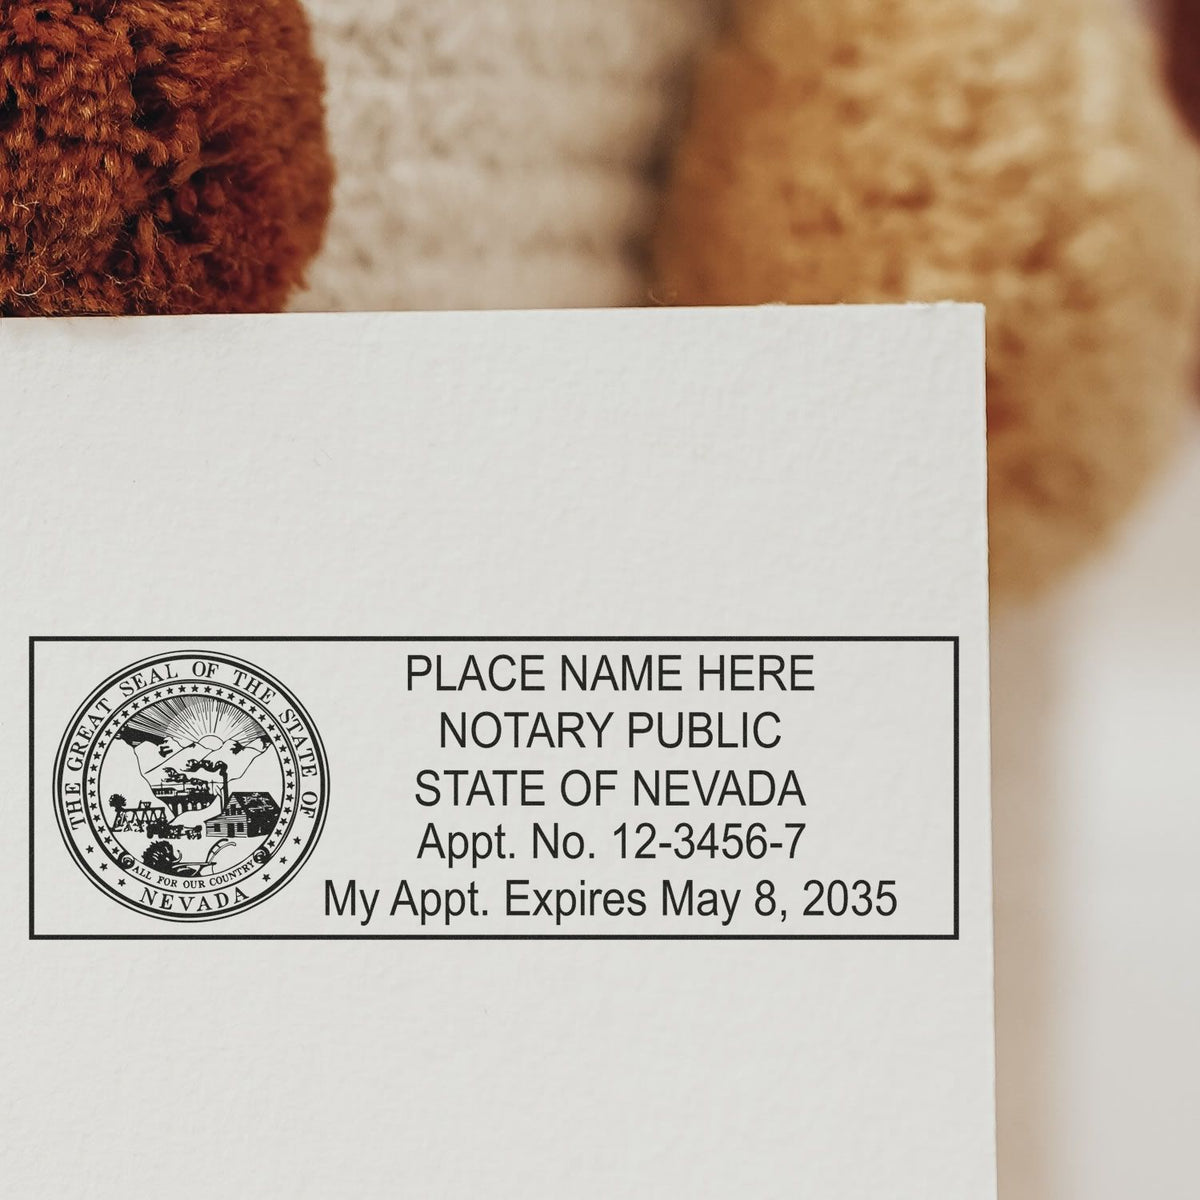 PSI Nevada Notary Stamp in use photo showing a stamped imprint of the PSI Nevada Notary Stamp